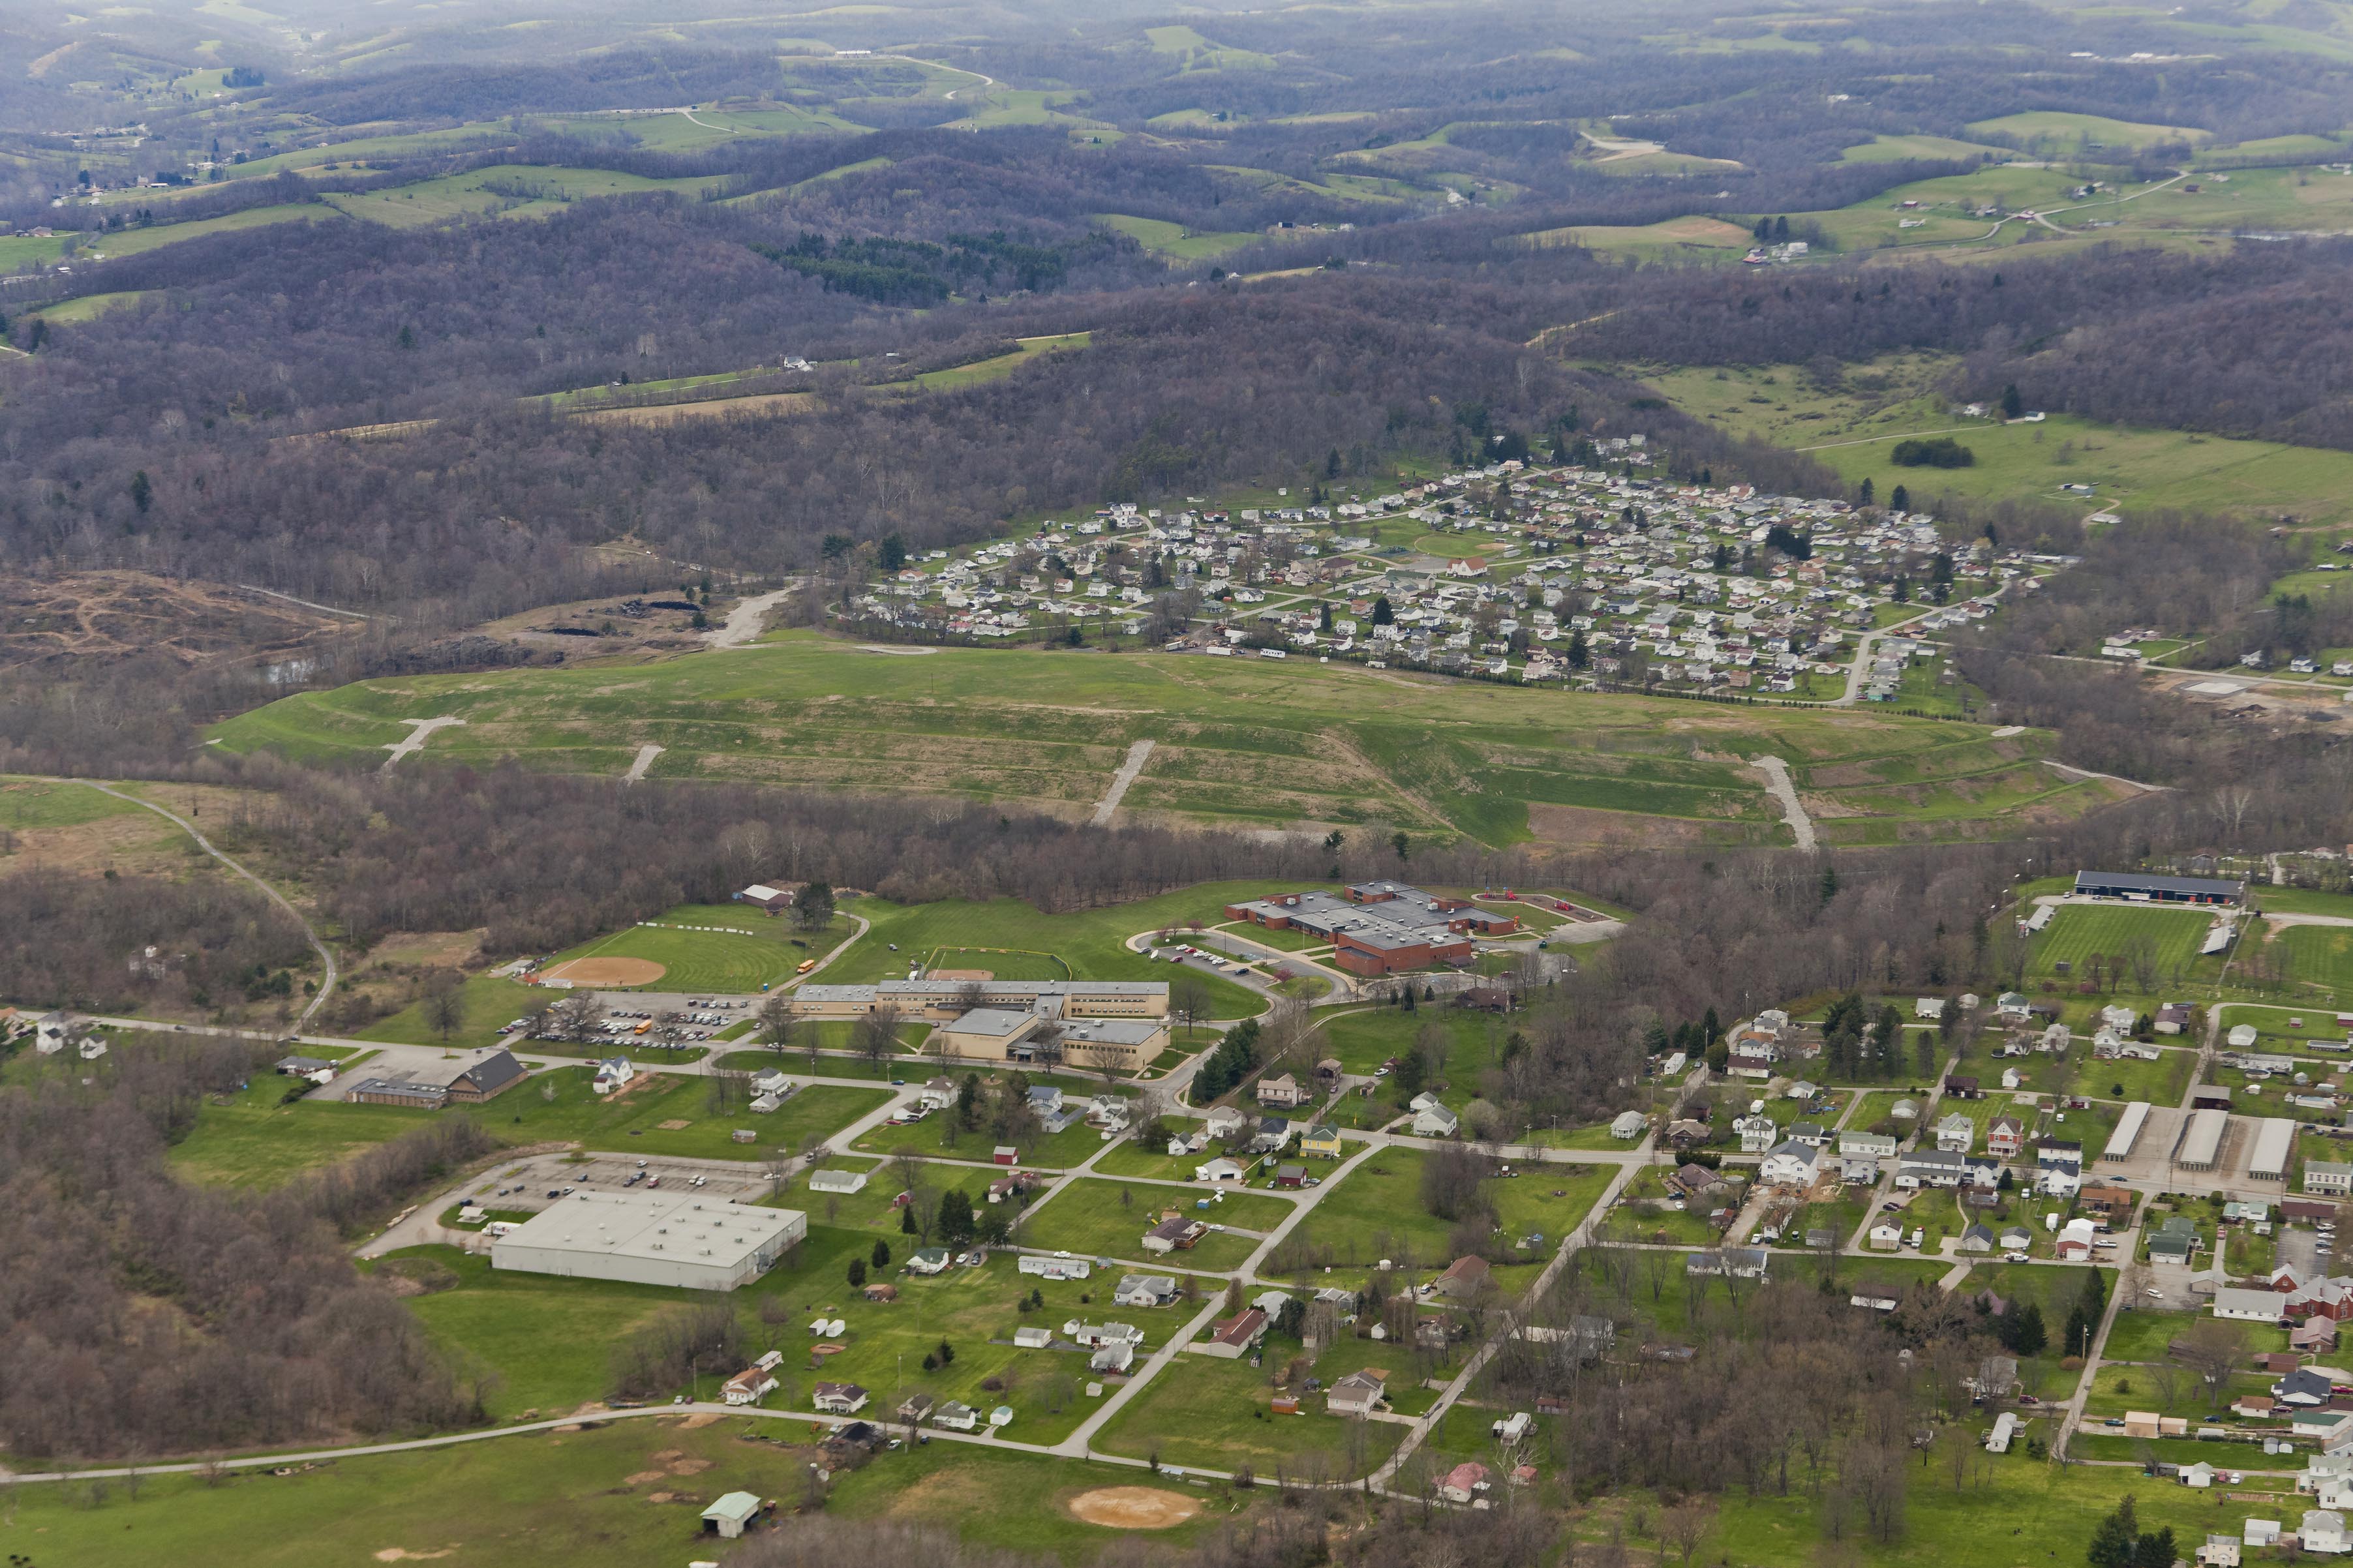 Reclaiming a Company Town Project in Mather, PA. After construction (2016).